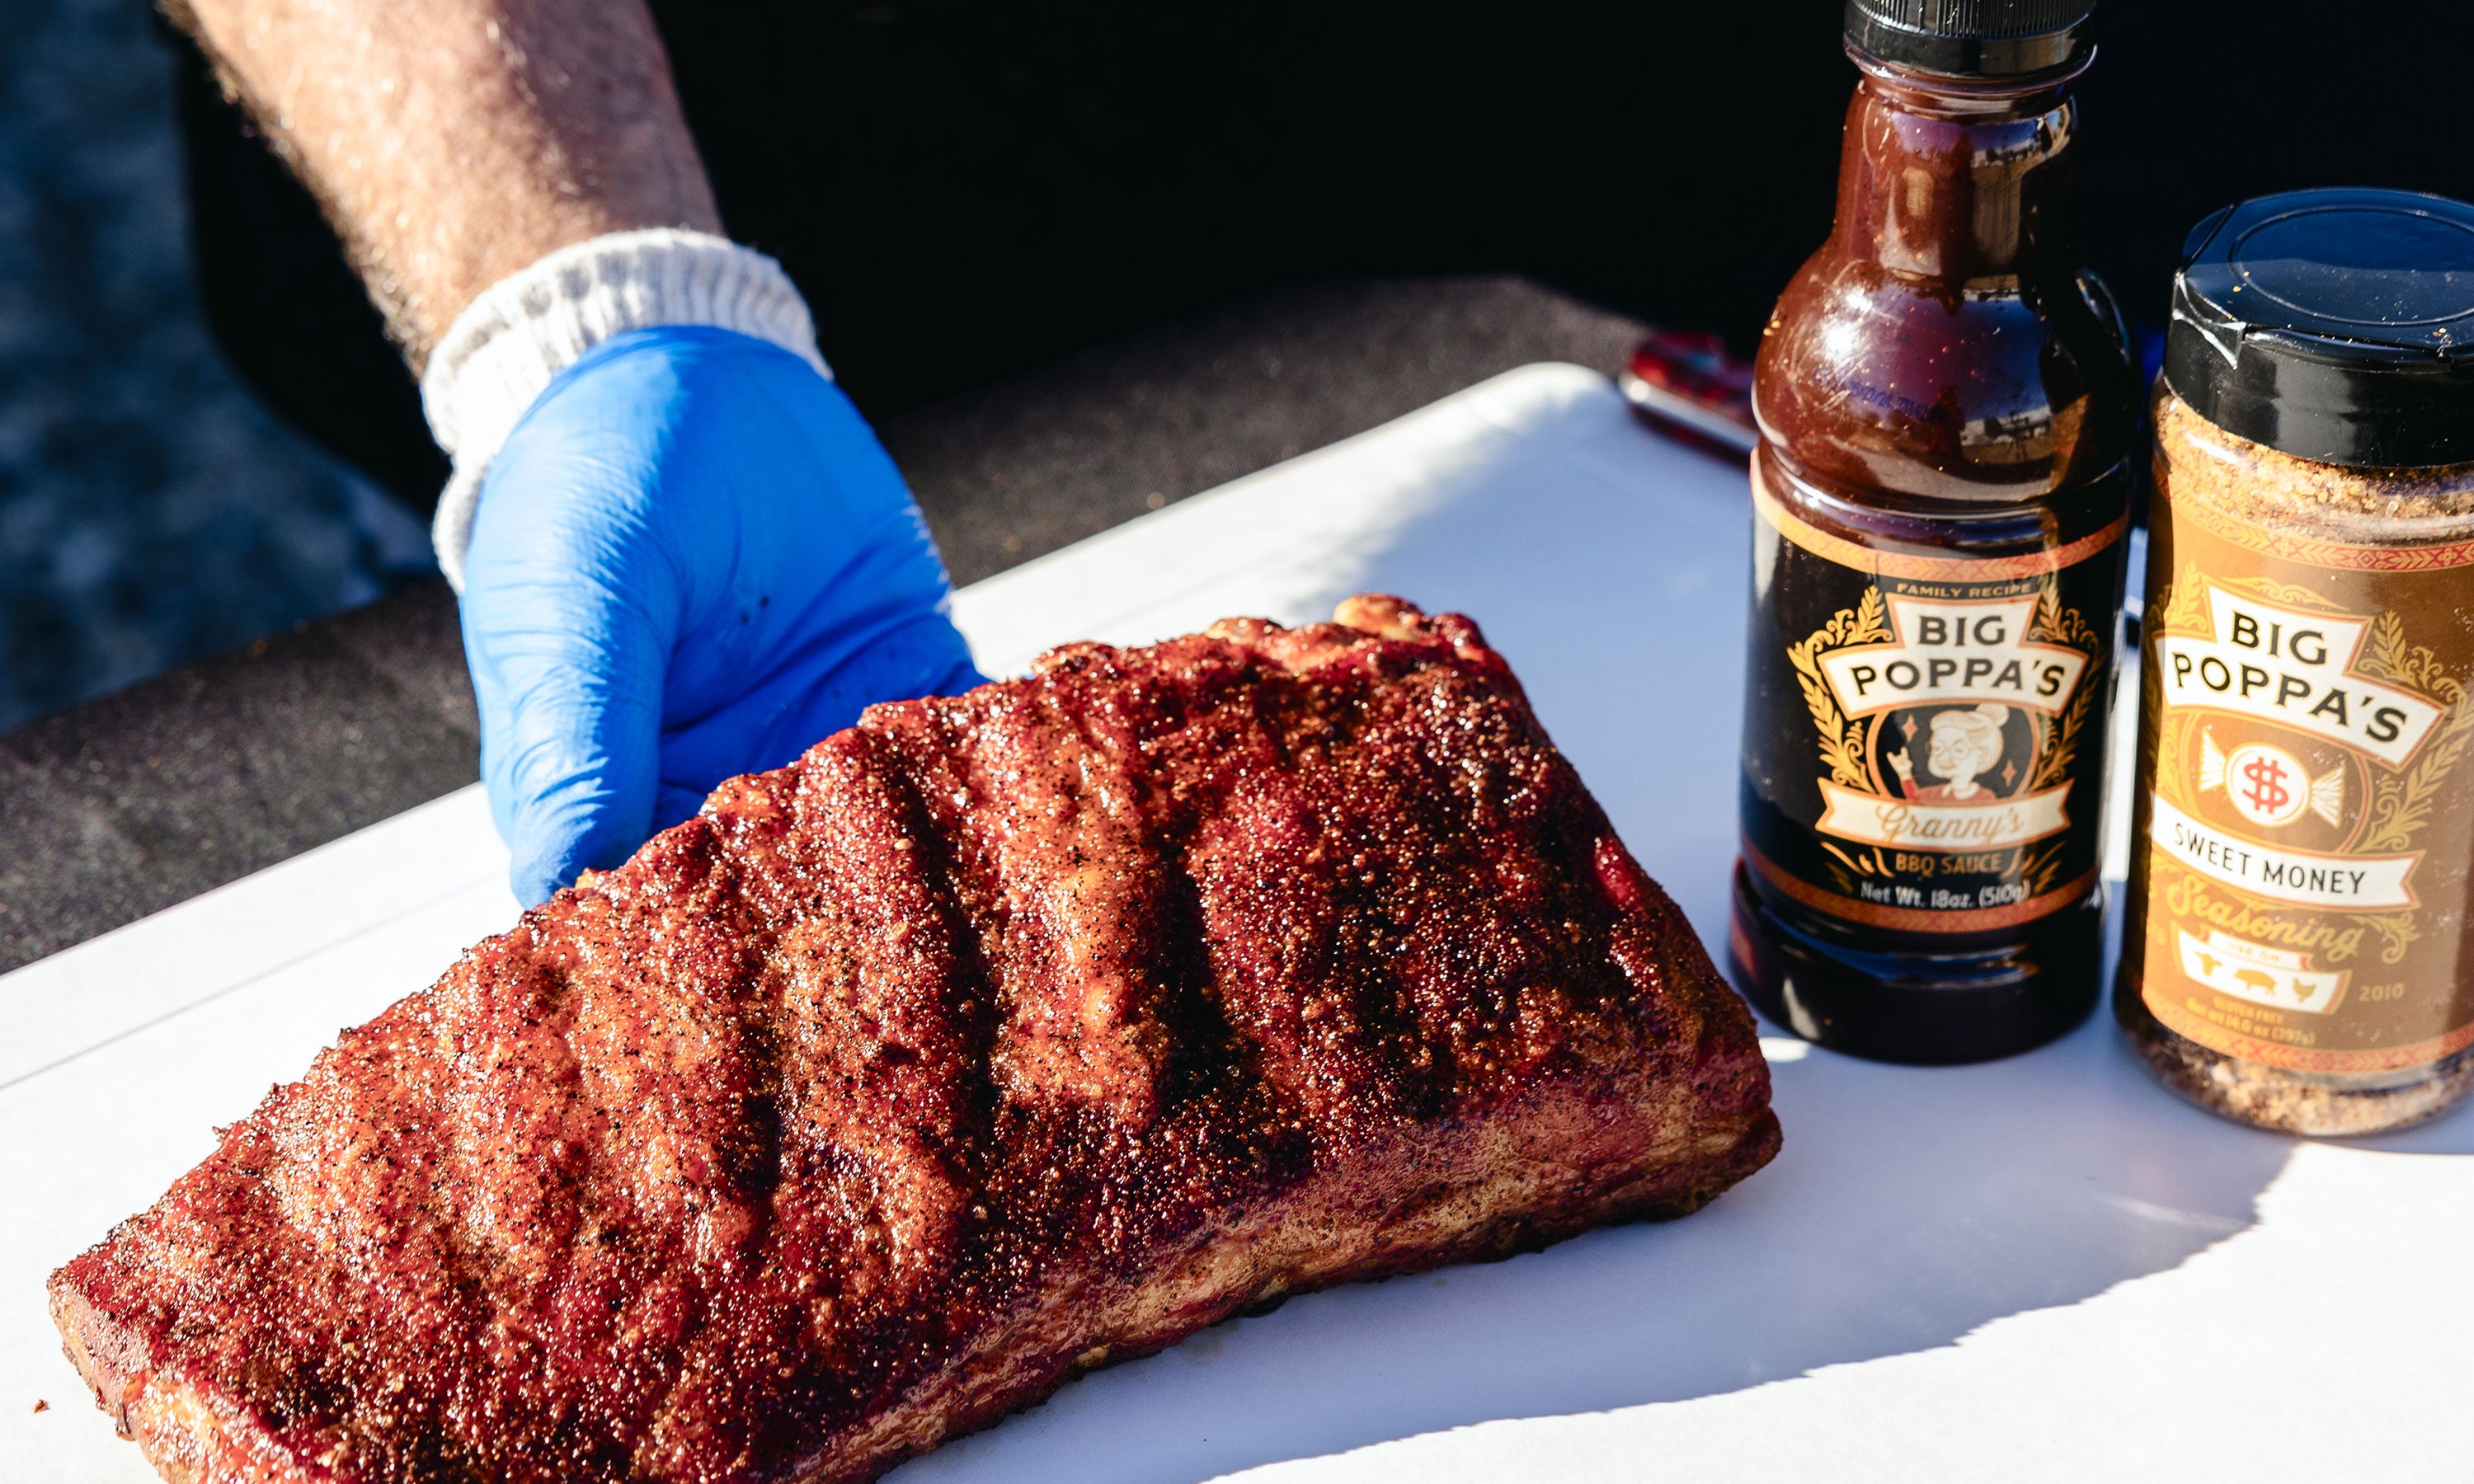 A succulent slab of ribs that is getting ready for a generously coated with Big Poppa's Granny's BBQ Sauce and sprinkled with Sweet Money BBQ Rub, creating a glossy and richly seasoned surface. The ribs are perfectly cooked, showcasing a deep, caramelized crust that highlights the savory and slightly sweet flavors of the seasoning.